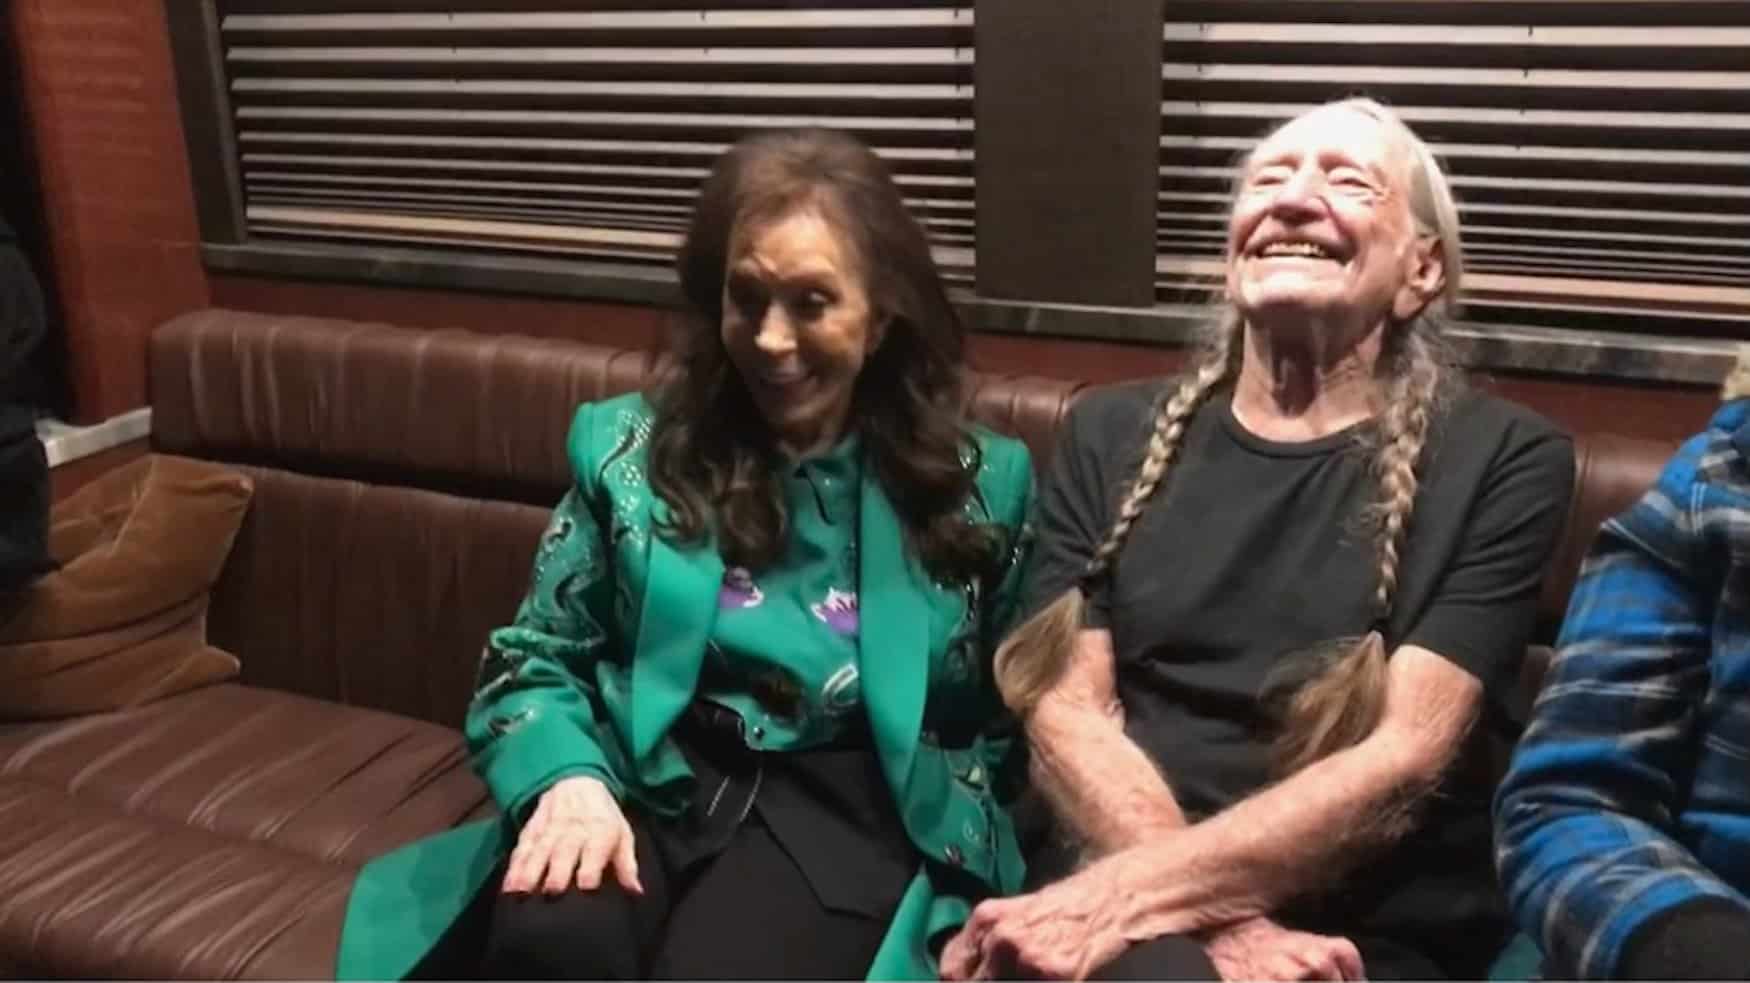 Loretta Lynn in a candid photo with Willie Nelson